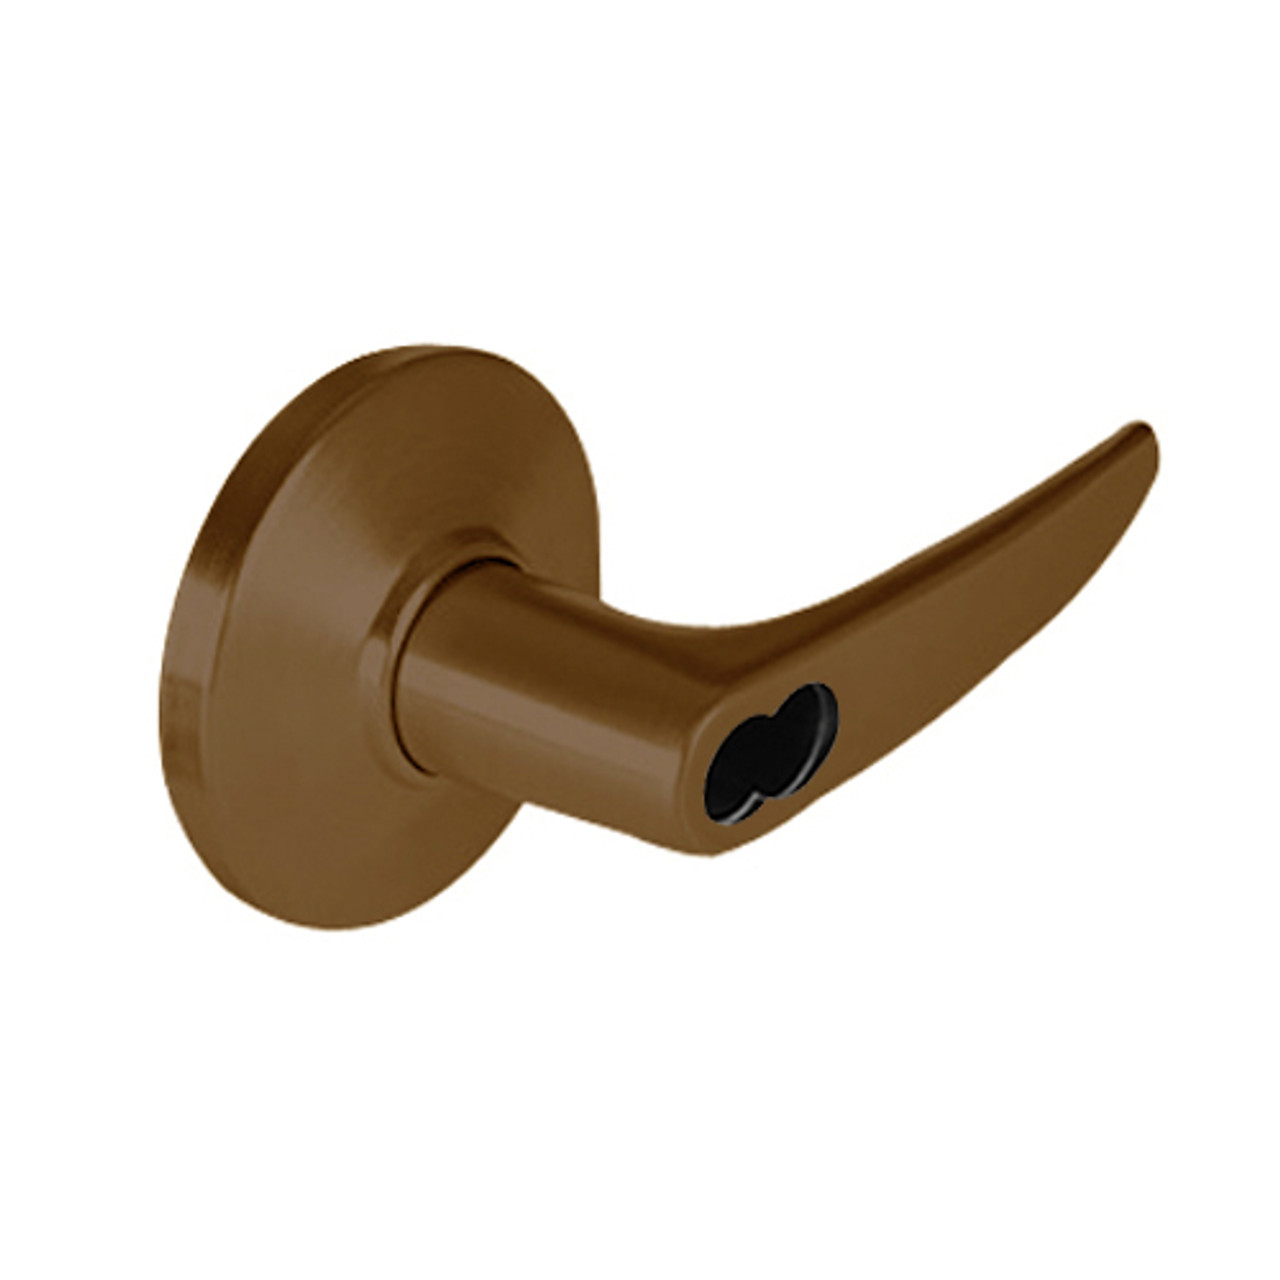 9K37RD16DSTK690 Best 9K Series Special Function Cylindrical Lever Locks with Curved without Return Lever Design Accept 7 Pin Best Core in Dark Bronze